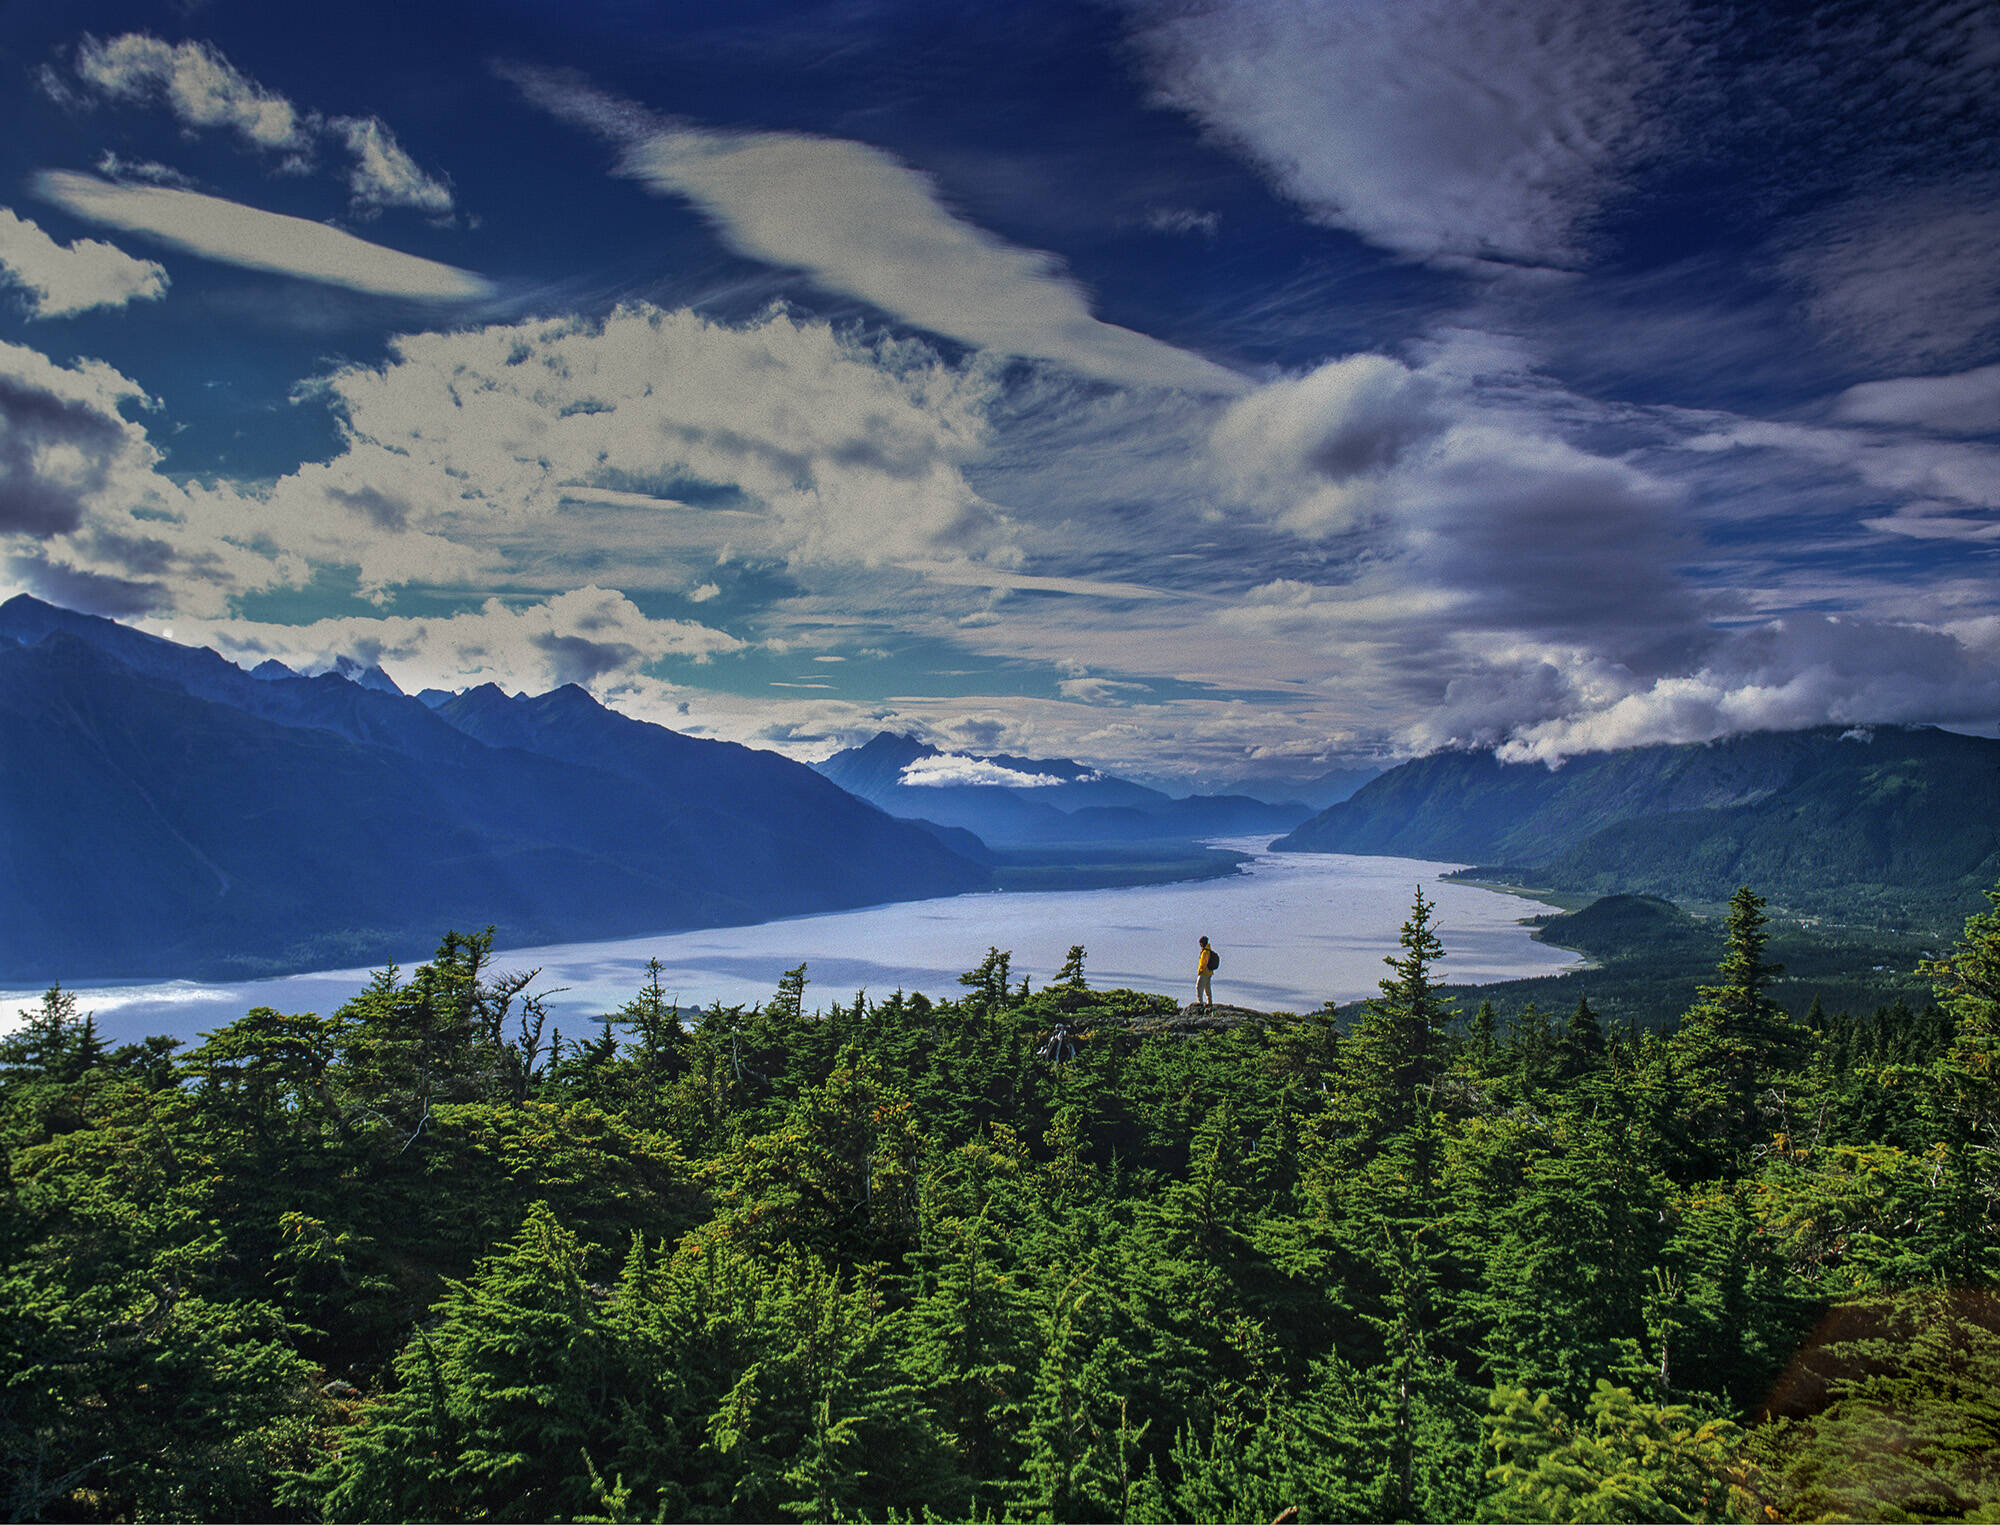 Courtesy Photo / Howie Garber 
A hiker looks out over forests, mountains, and ocean channels that comprise part of the Tongass National Forest, or SeaBank, in Southeast Alaska.